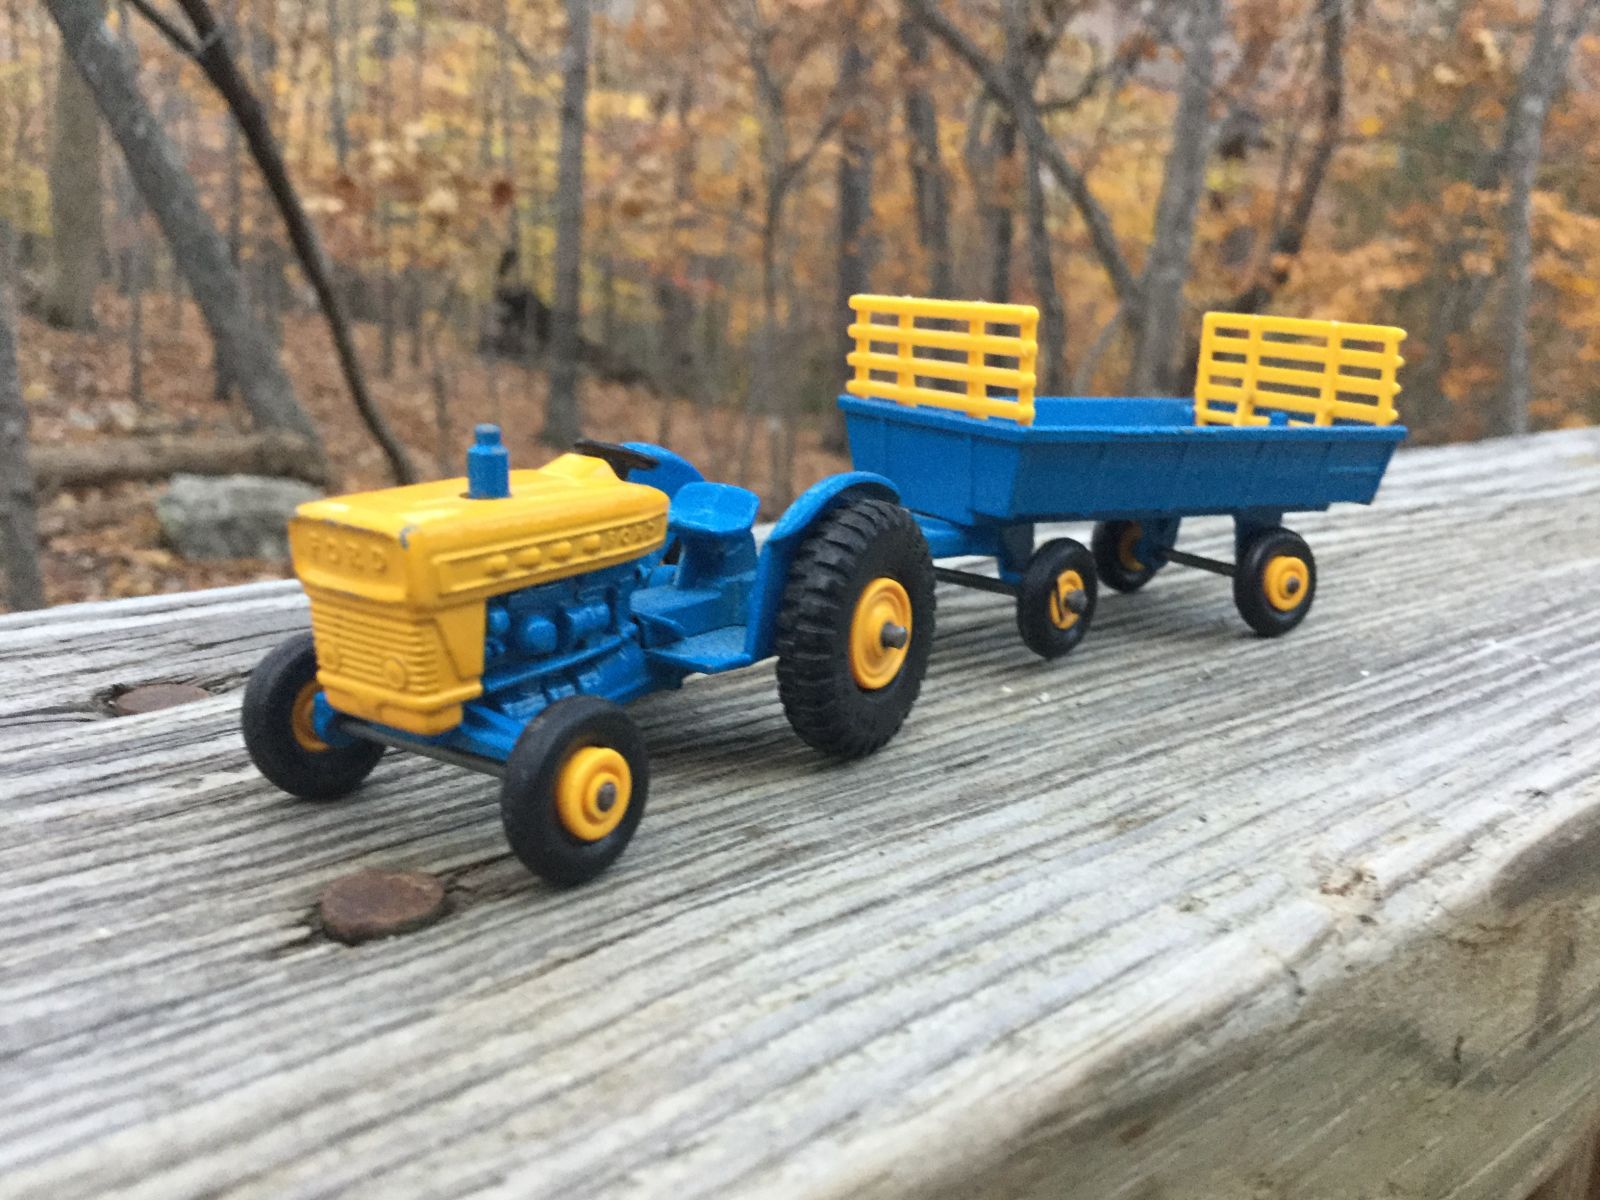 Ford Tractor and trailer. The yellow pieces in the trailer are often missing.